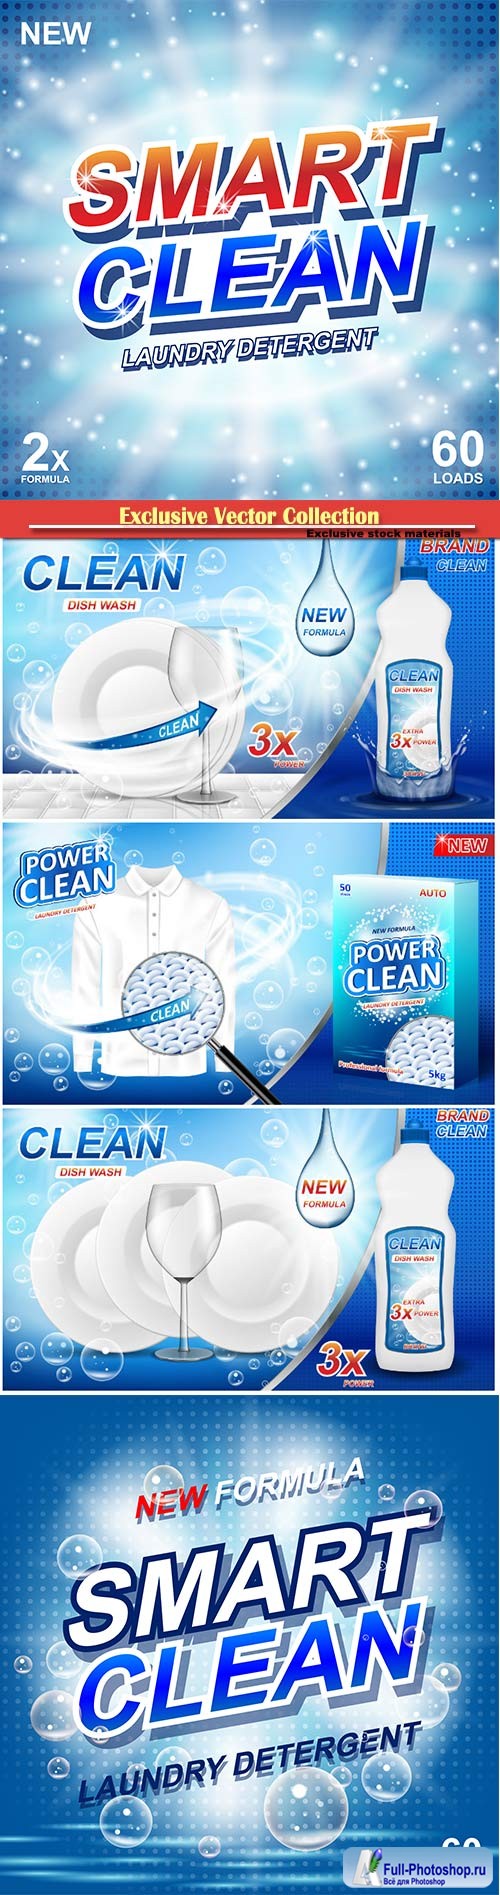 Realistic dishwashing template package design